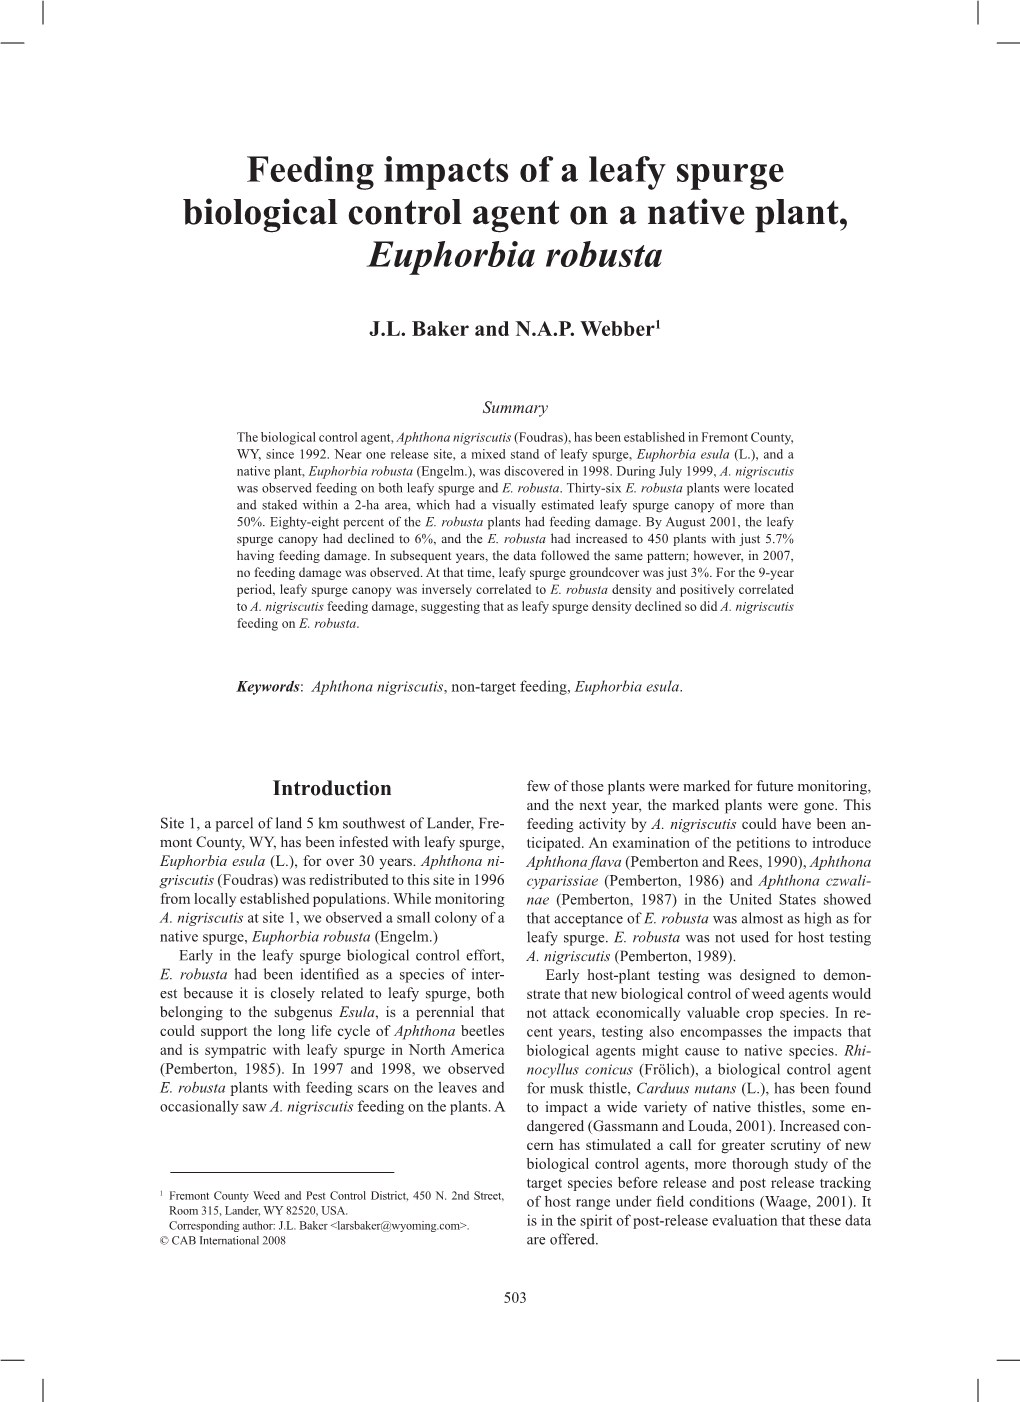 Feeding Impacts of a Leafy Spurge Biological Control Agent on a Native Plant, Euphorbia Robusta